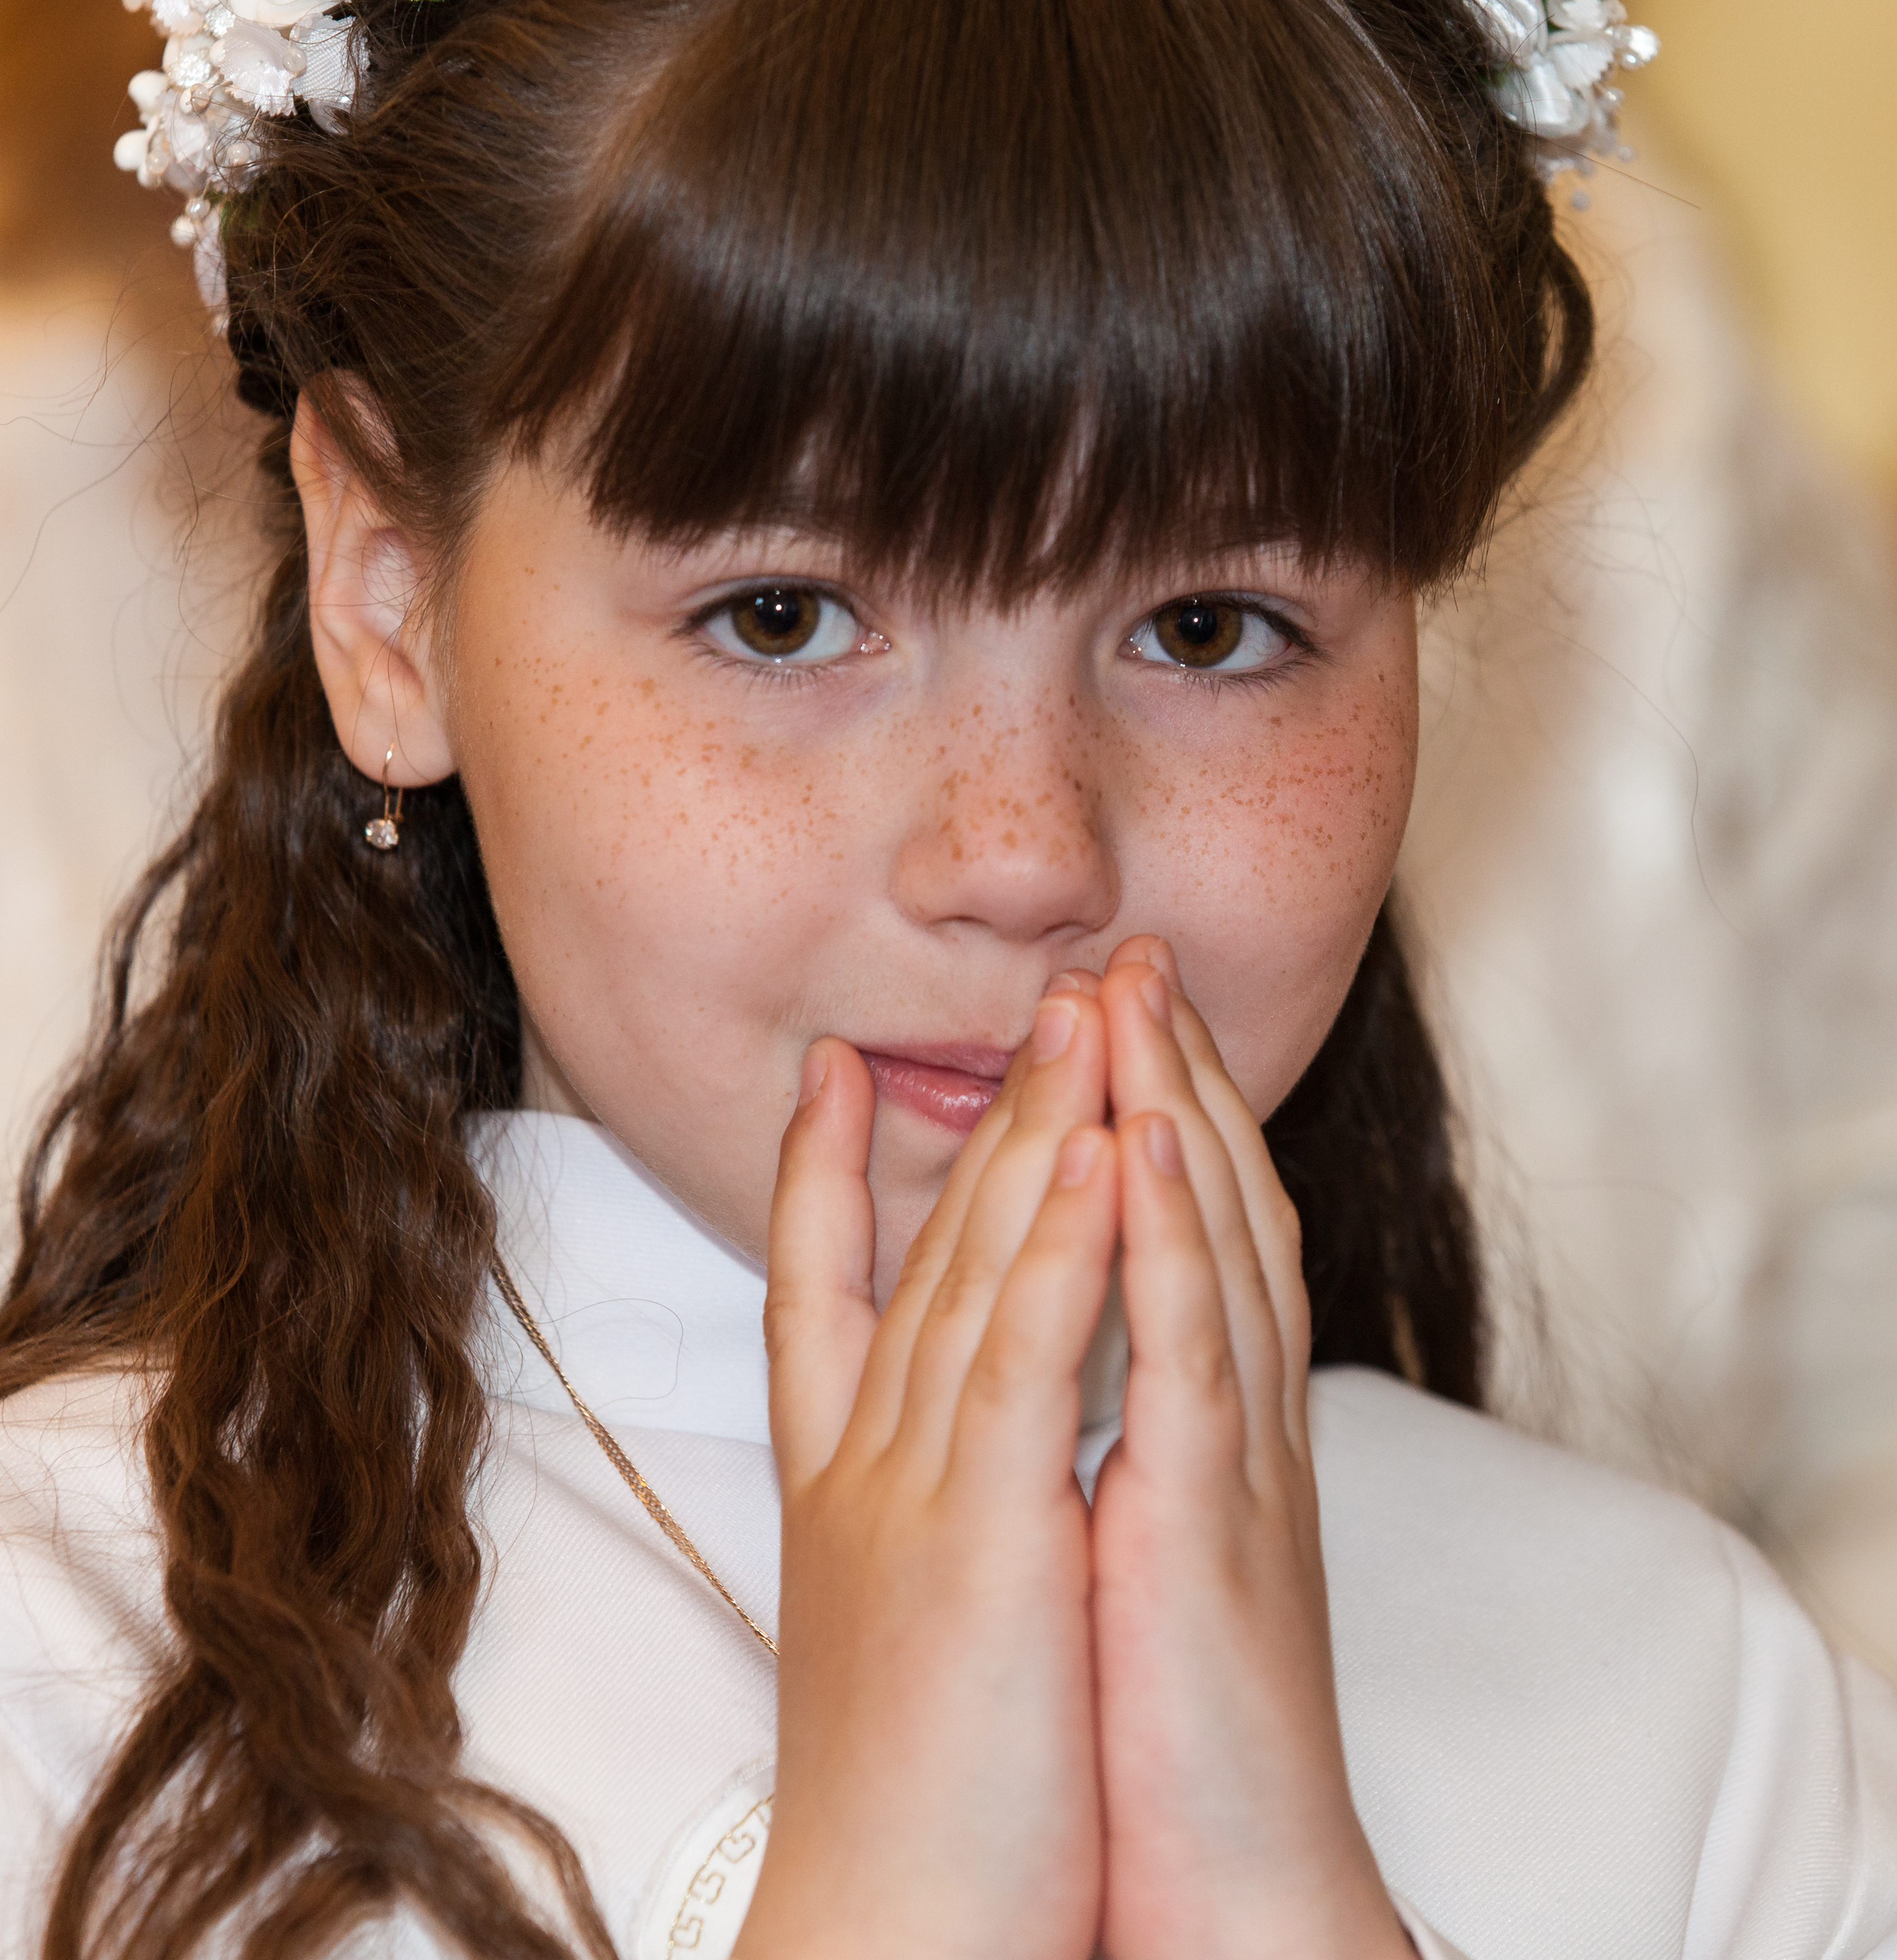 a Catholic child girl on her first Holy Communion Mass in June 2014, picture 1/4